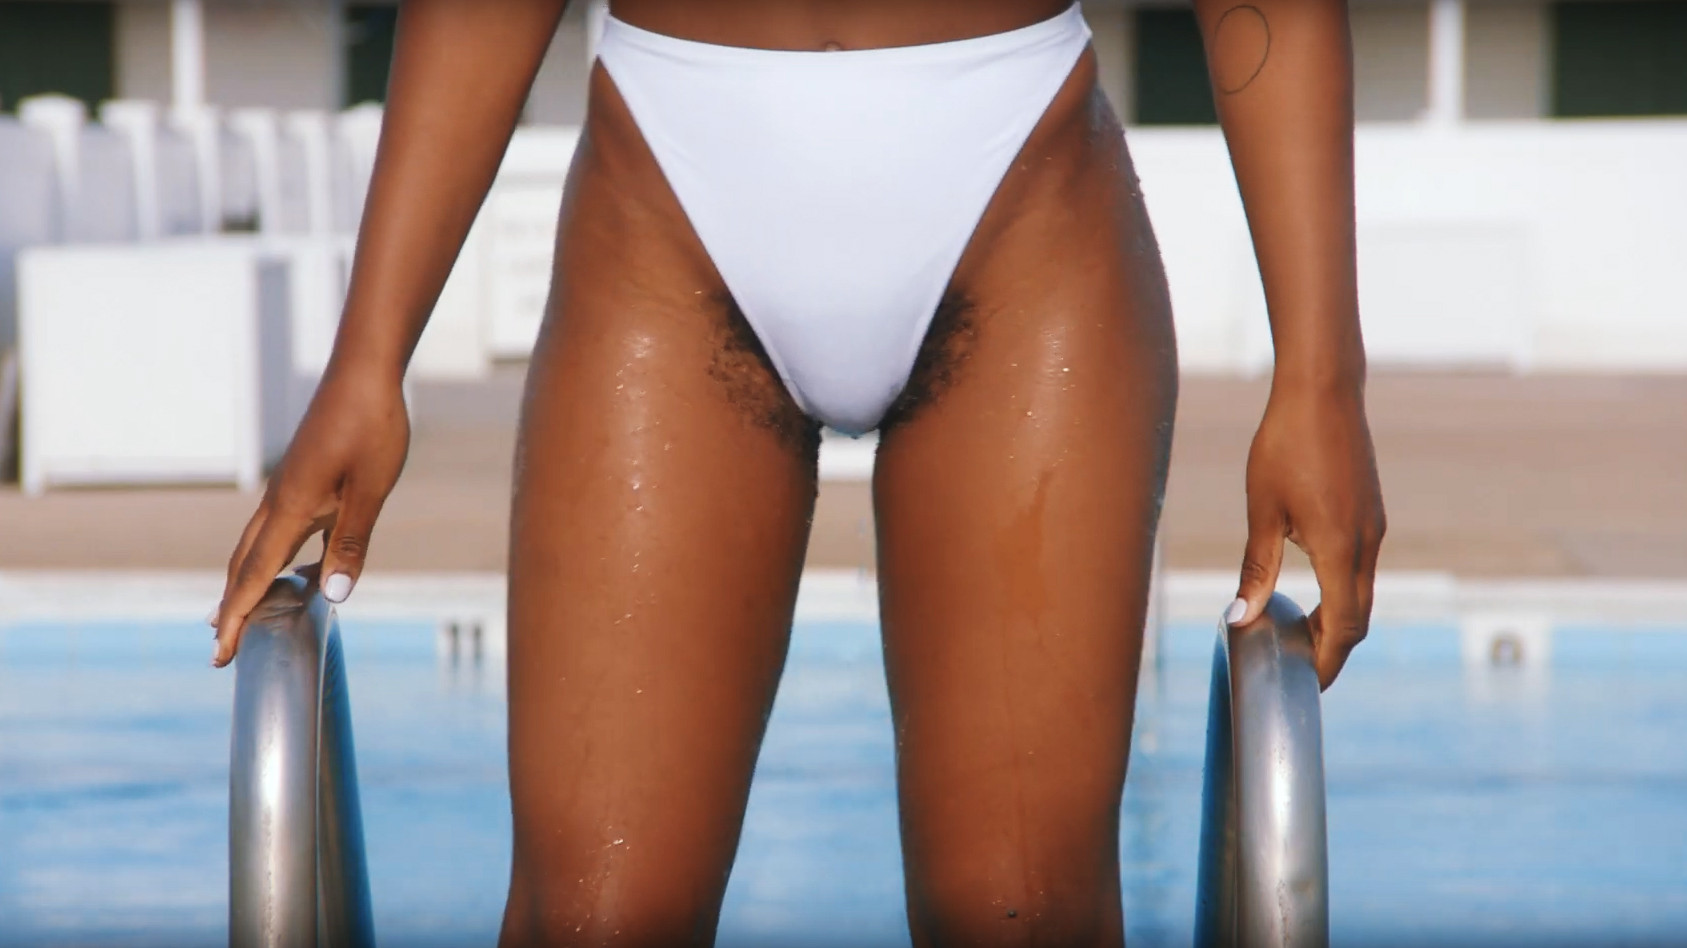 Female Pubic Hairstyle Photos
 Pubic Hair Is on Full Display in This Razor Ad—and We’re